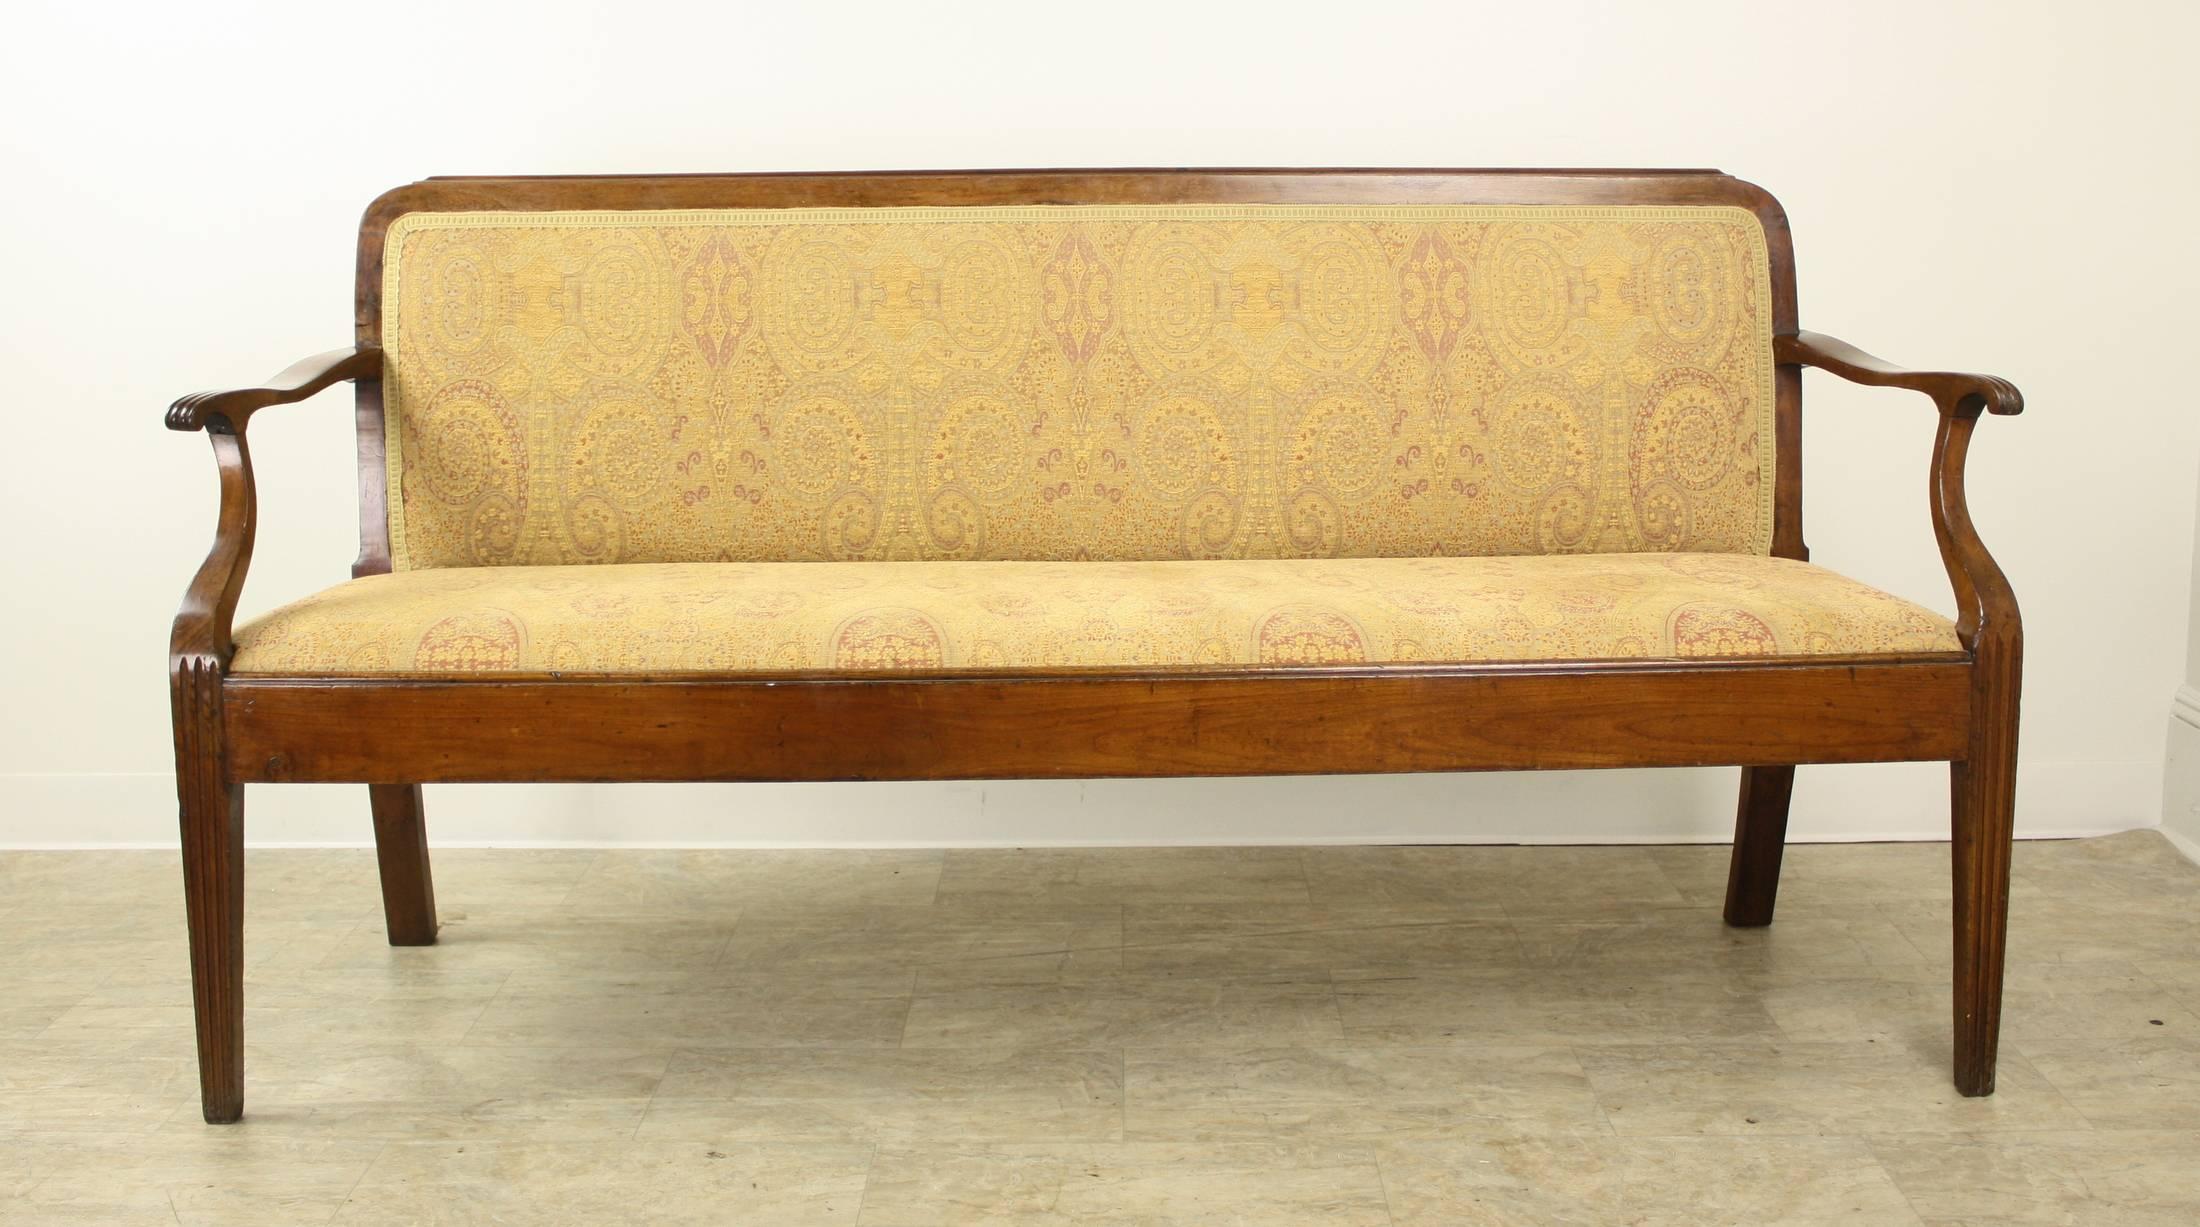 A slim and elegant fruitwood sofa in wonderful a condition for its age. Classic Scandanavian carved accents on the arms and legs. We love that the piece is upholstered front and back!